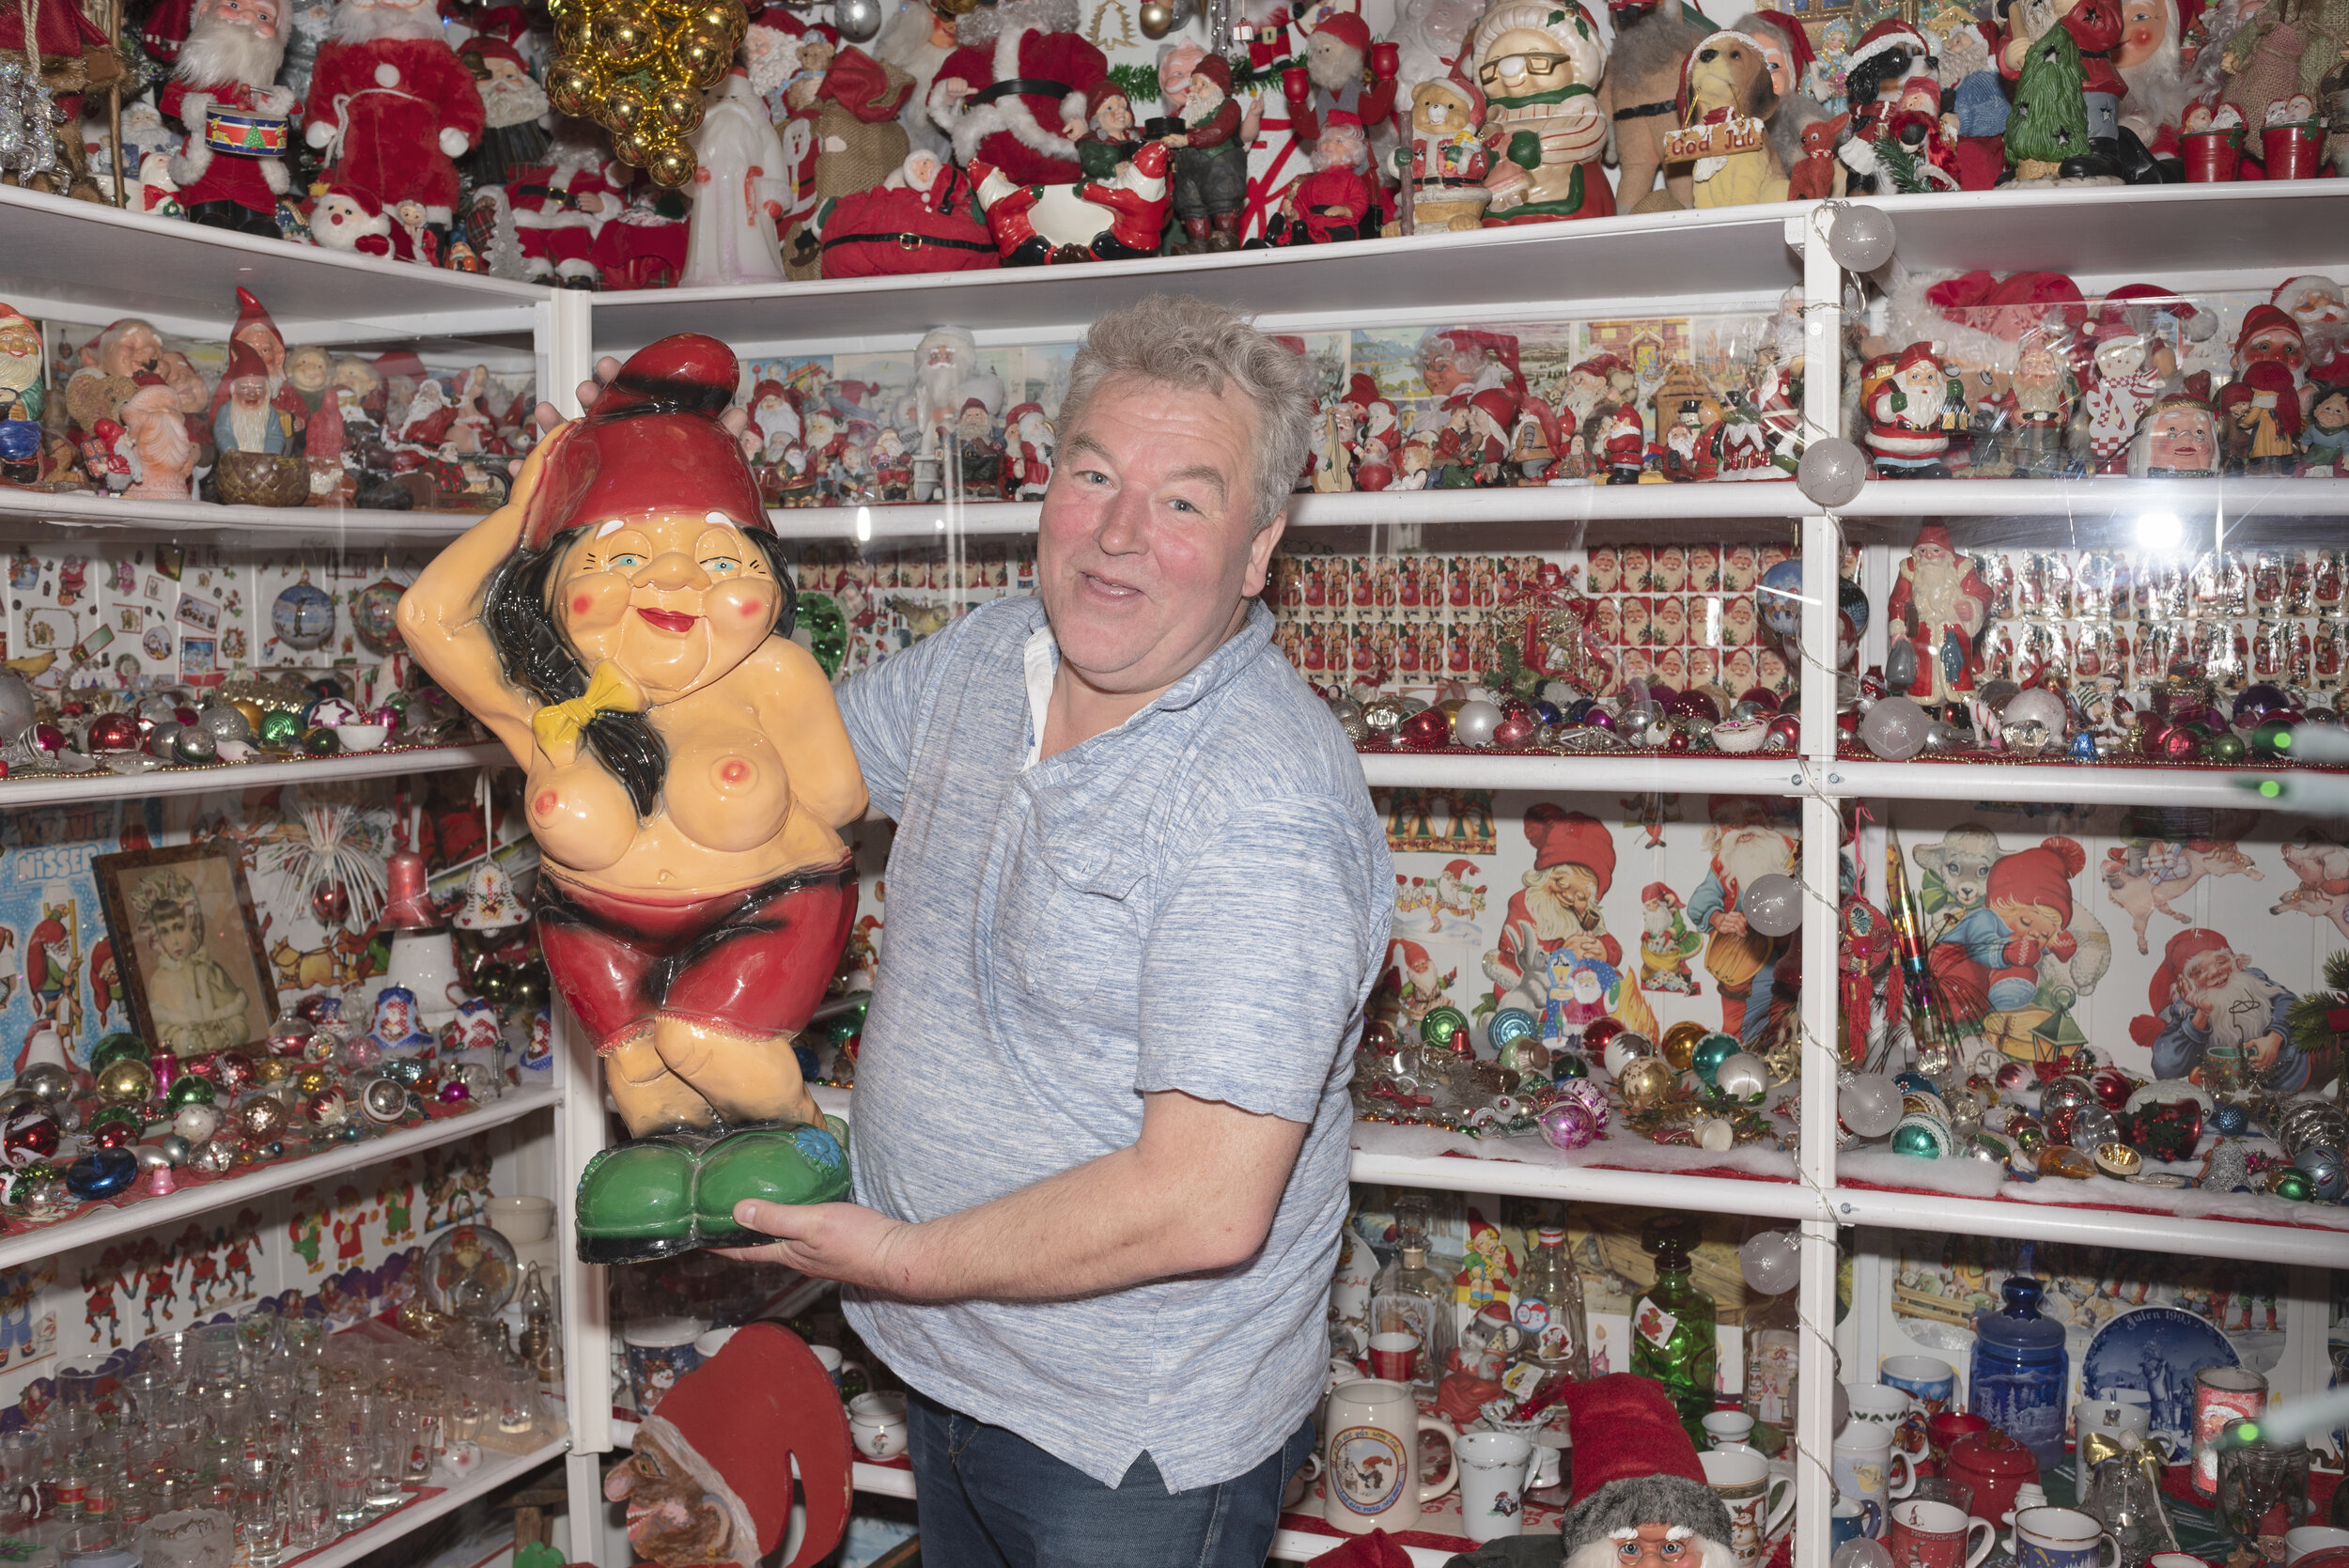  Raymond Tetlie shows off one of his santa’s from his 40.000 figures museum. For VG Helg, 2019. 